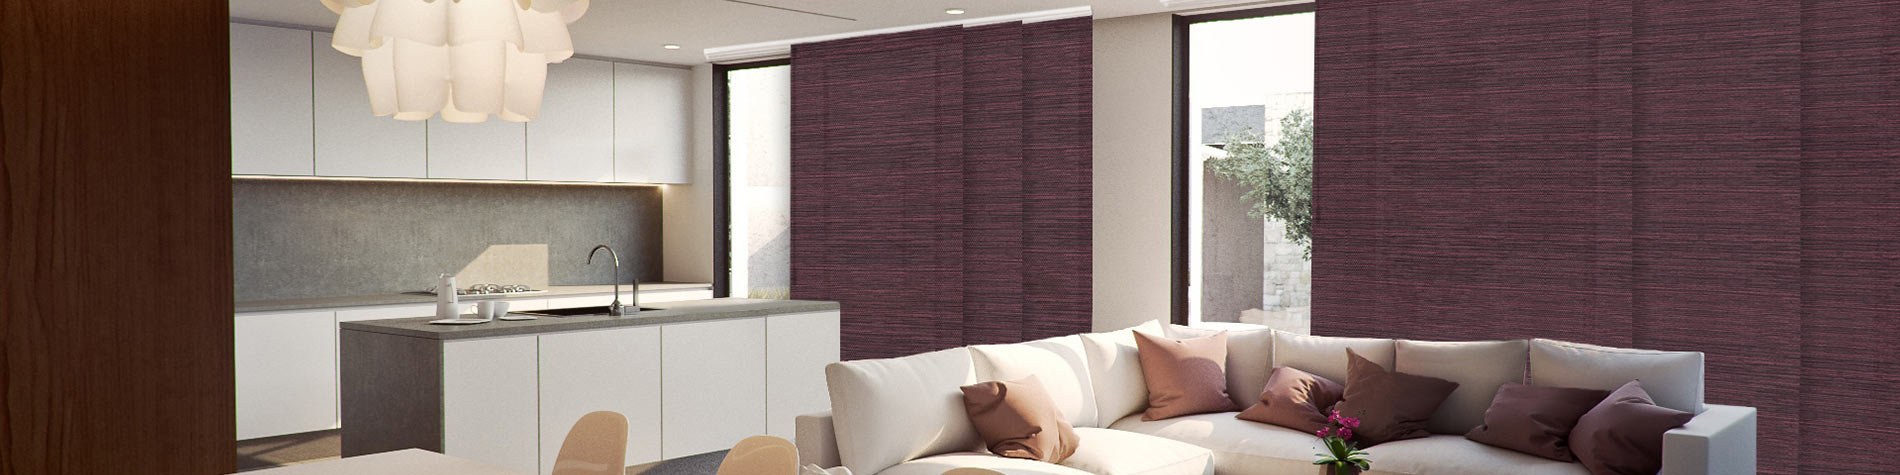 blinds for any sized windows, large or small.